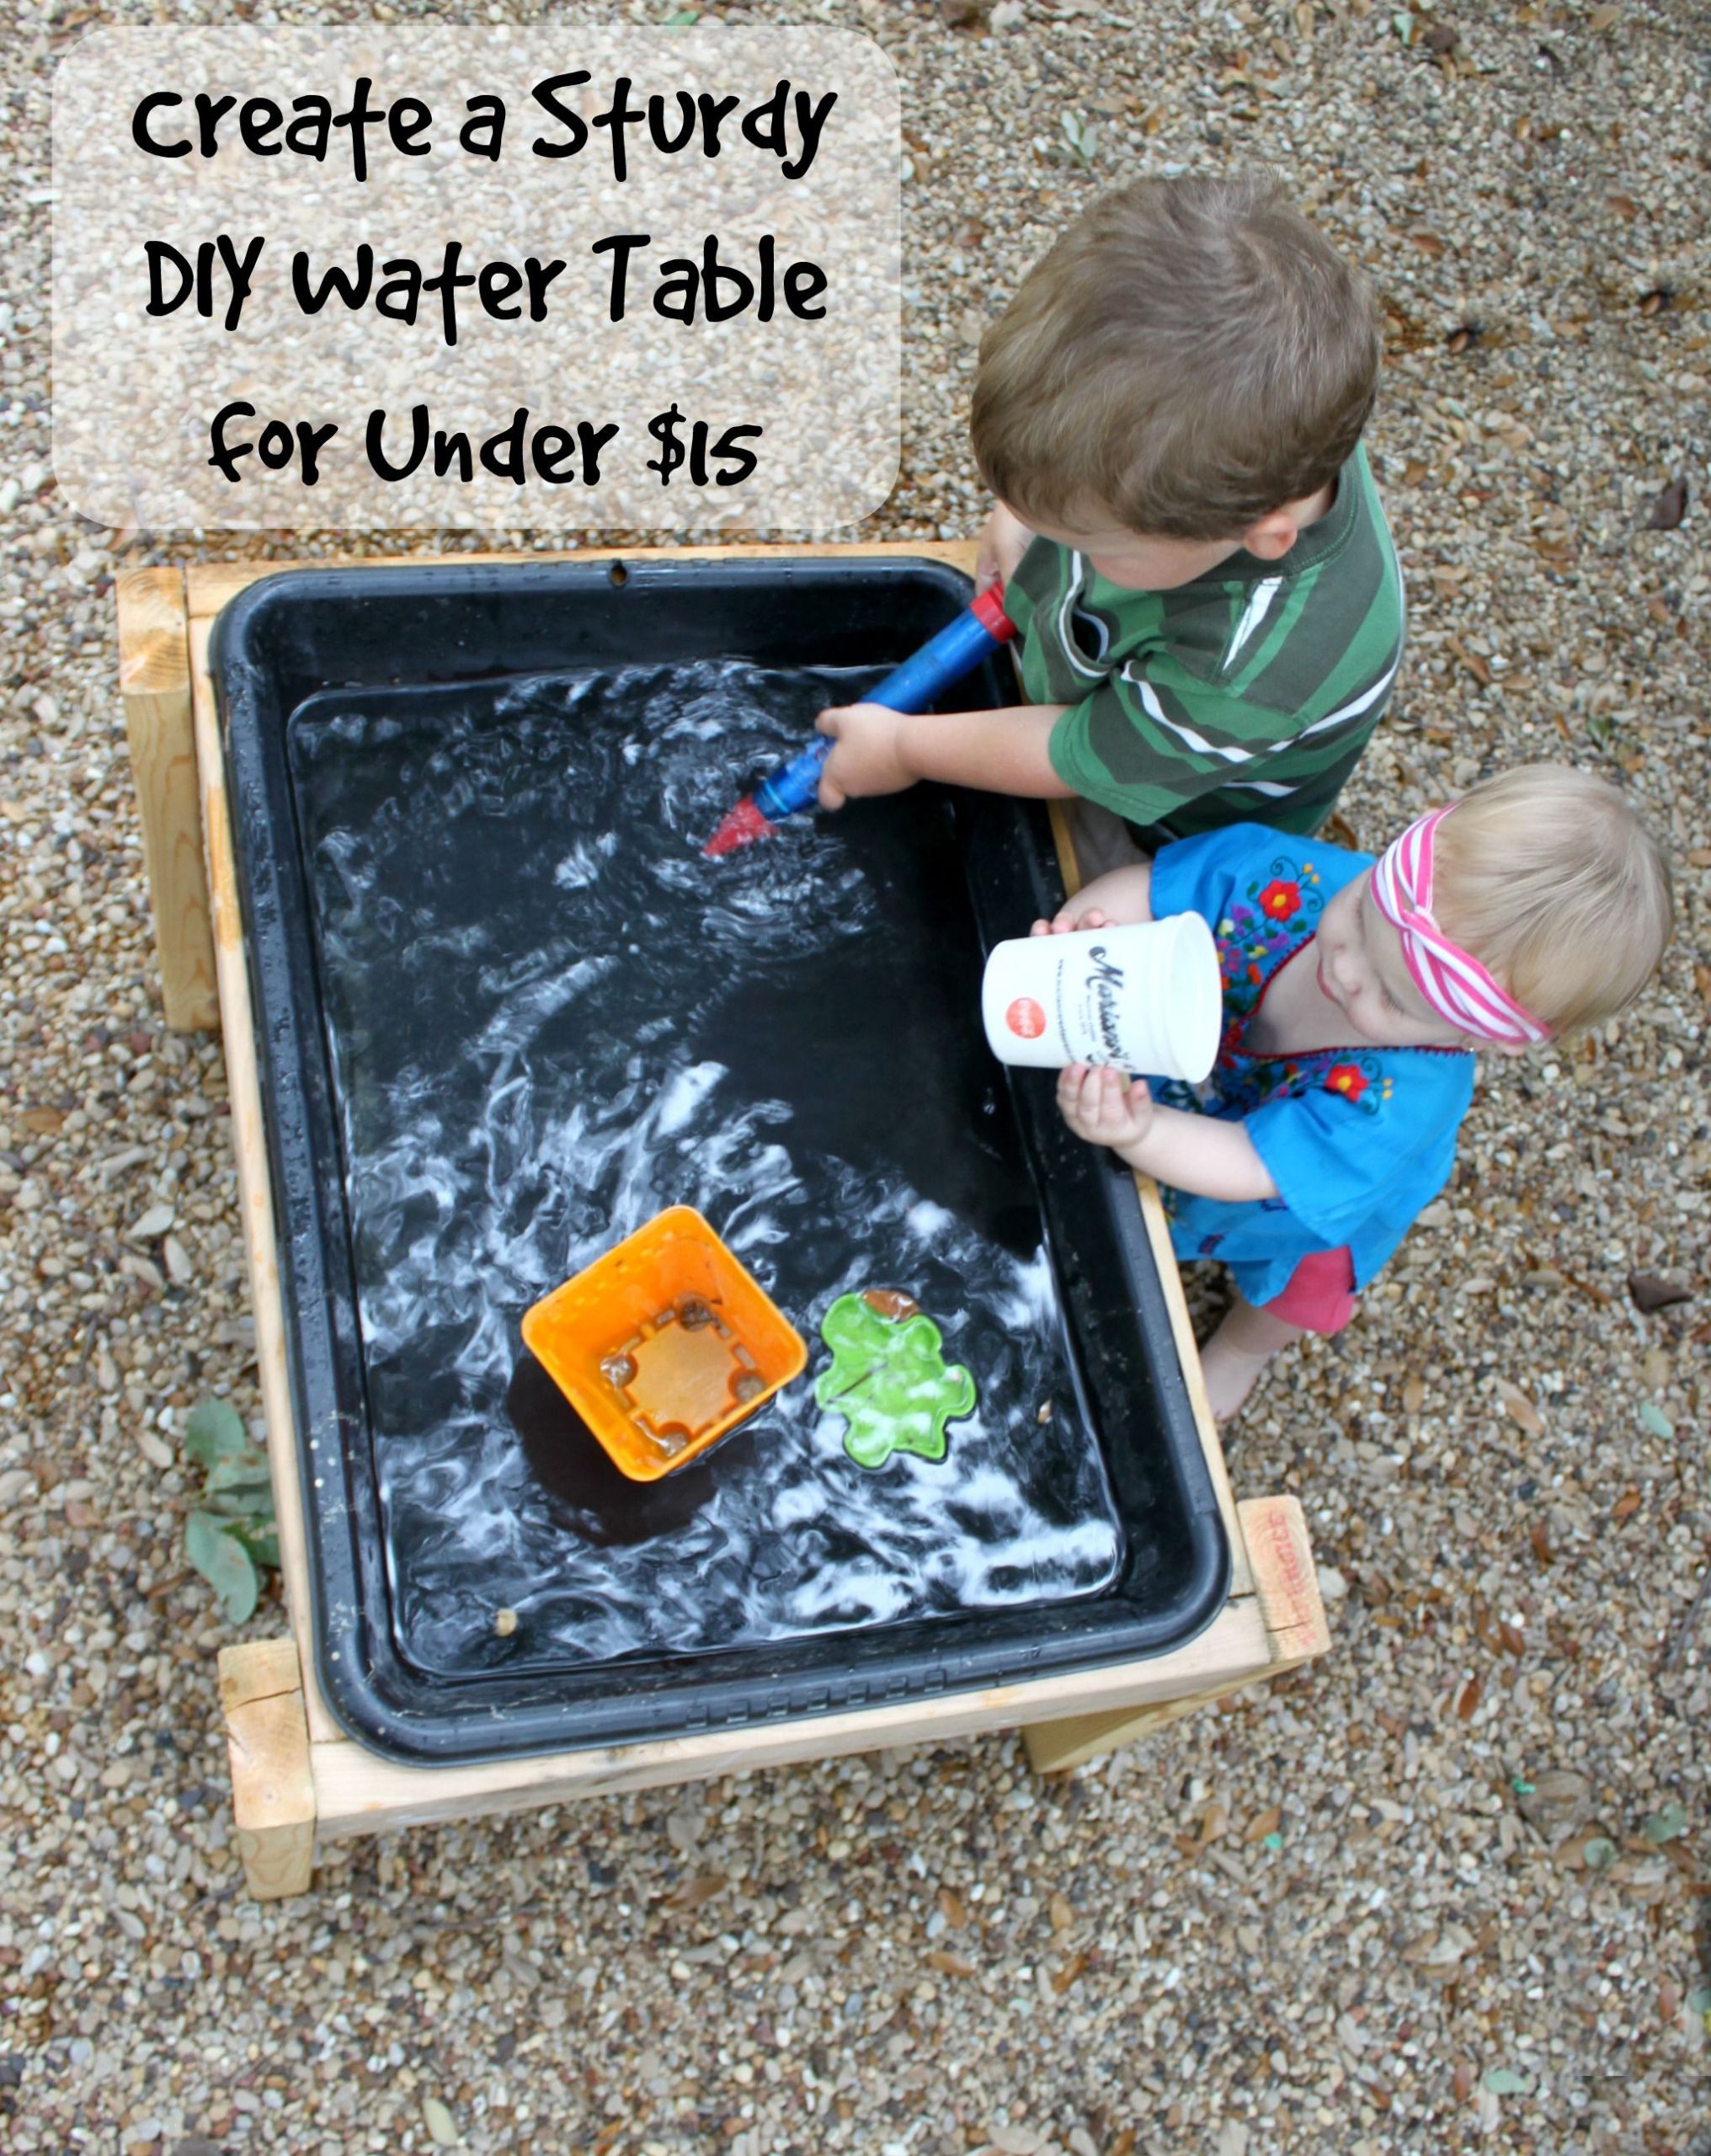 DIY Kids Water Table
 Make a DIY Water Table for Less than $15